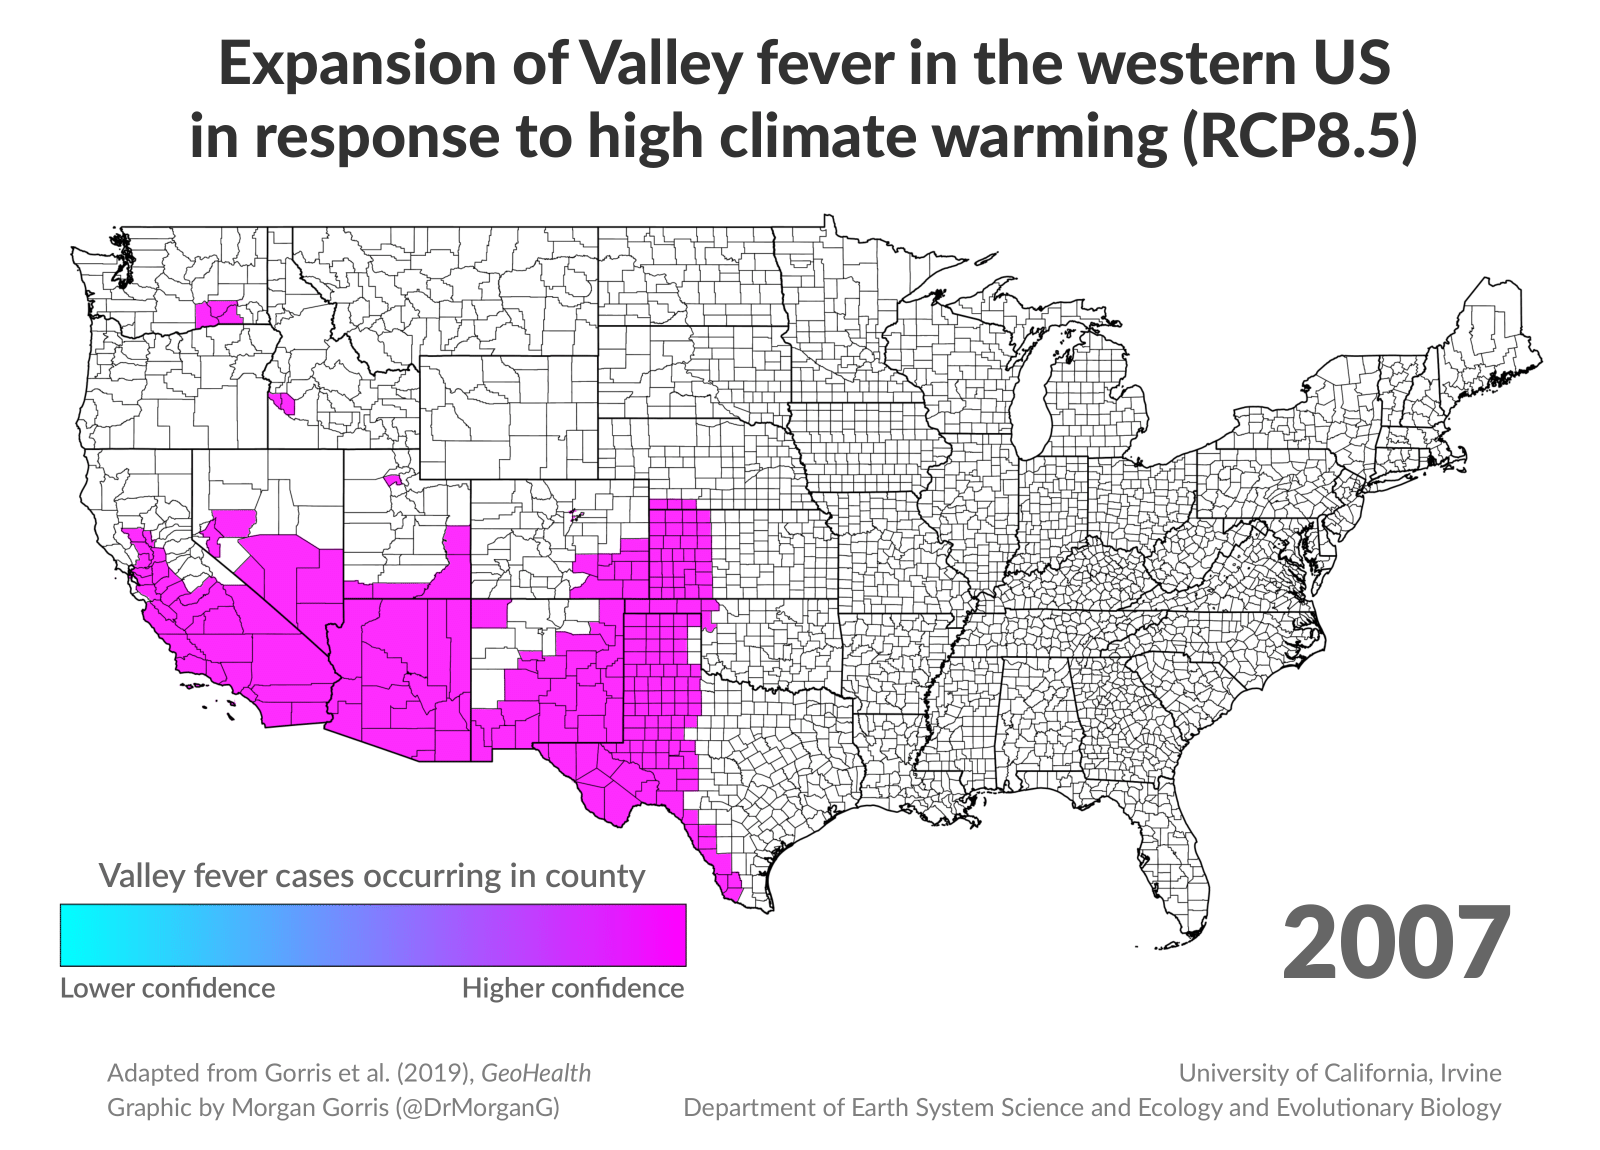 Infographic illustrating the expansion of Valley fever in the western U.S. in response to high climate warming from 2007 with predictions to 2095. "Higher confidence" spreading areas show concentrations in the Southwest and to the West Coast toward the Canadian border.. 